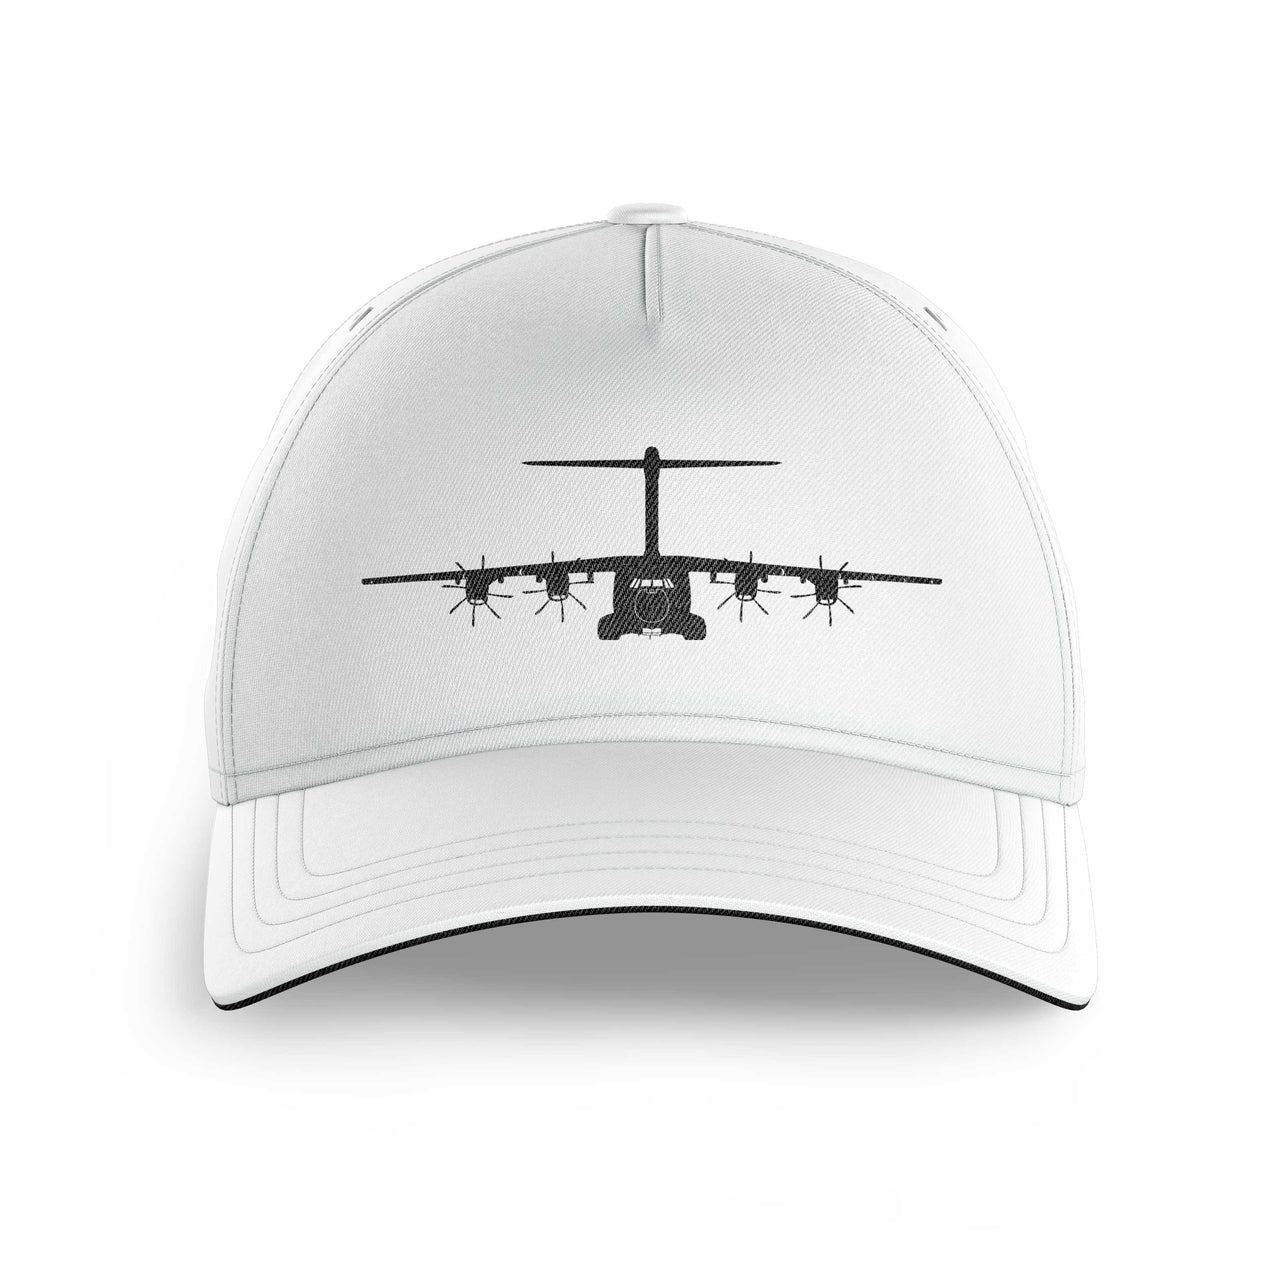 Airbus A400M Silhouette Printed Hats